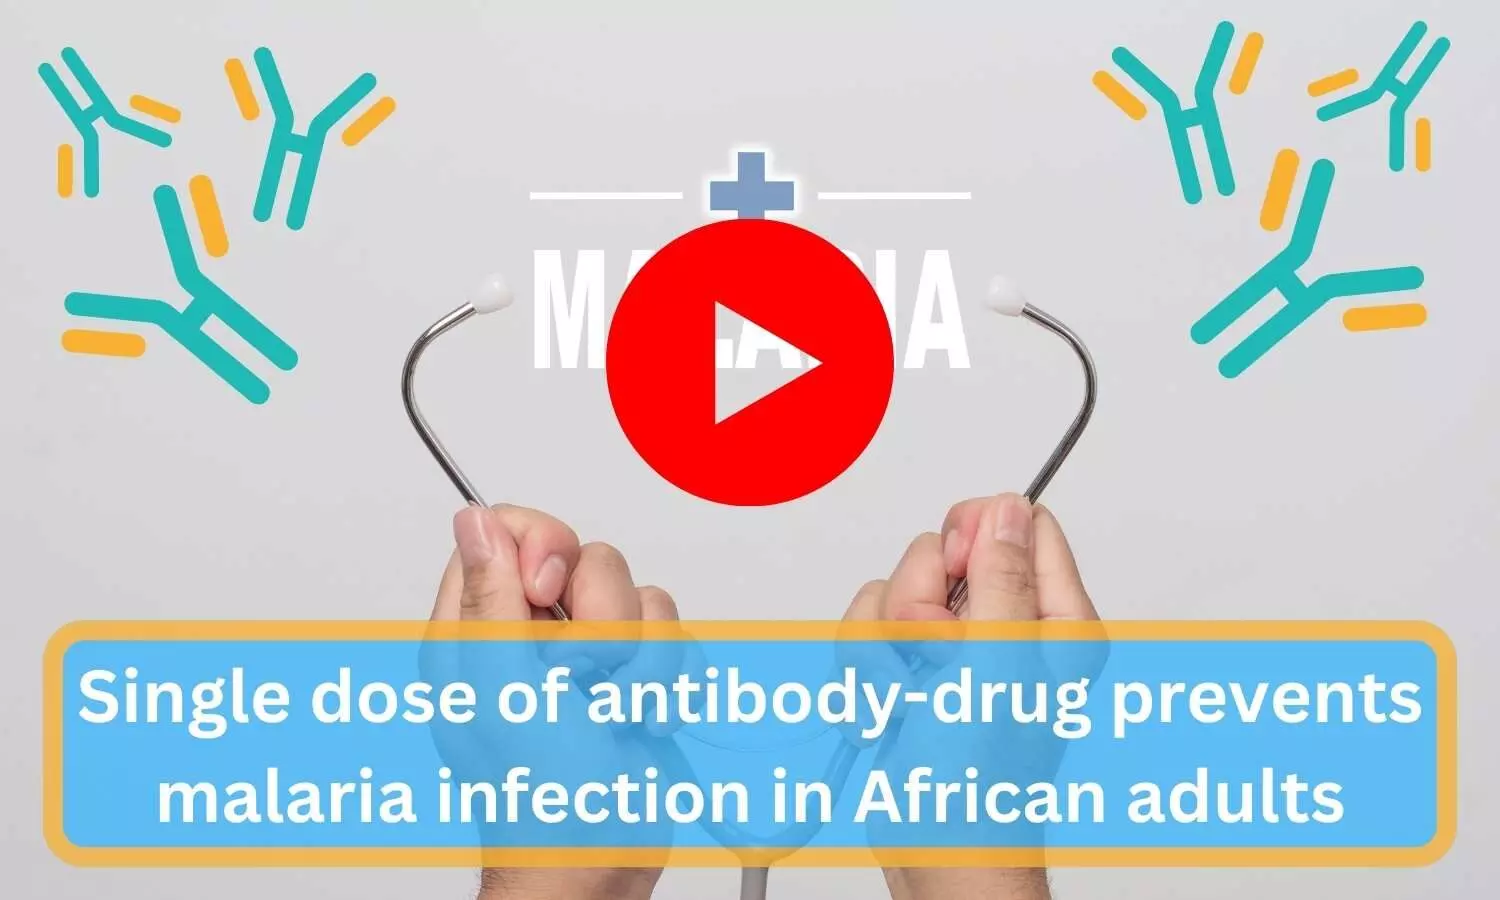 Single dose of antibody-drug prevents malaria infection in African adults